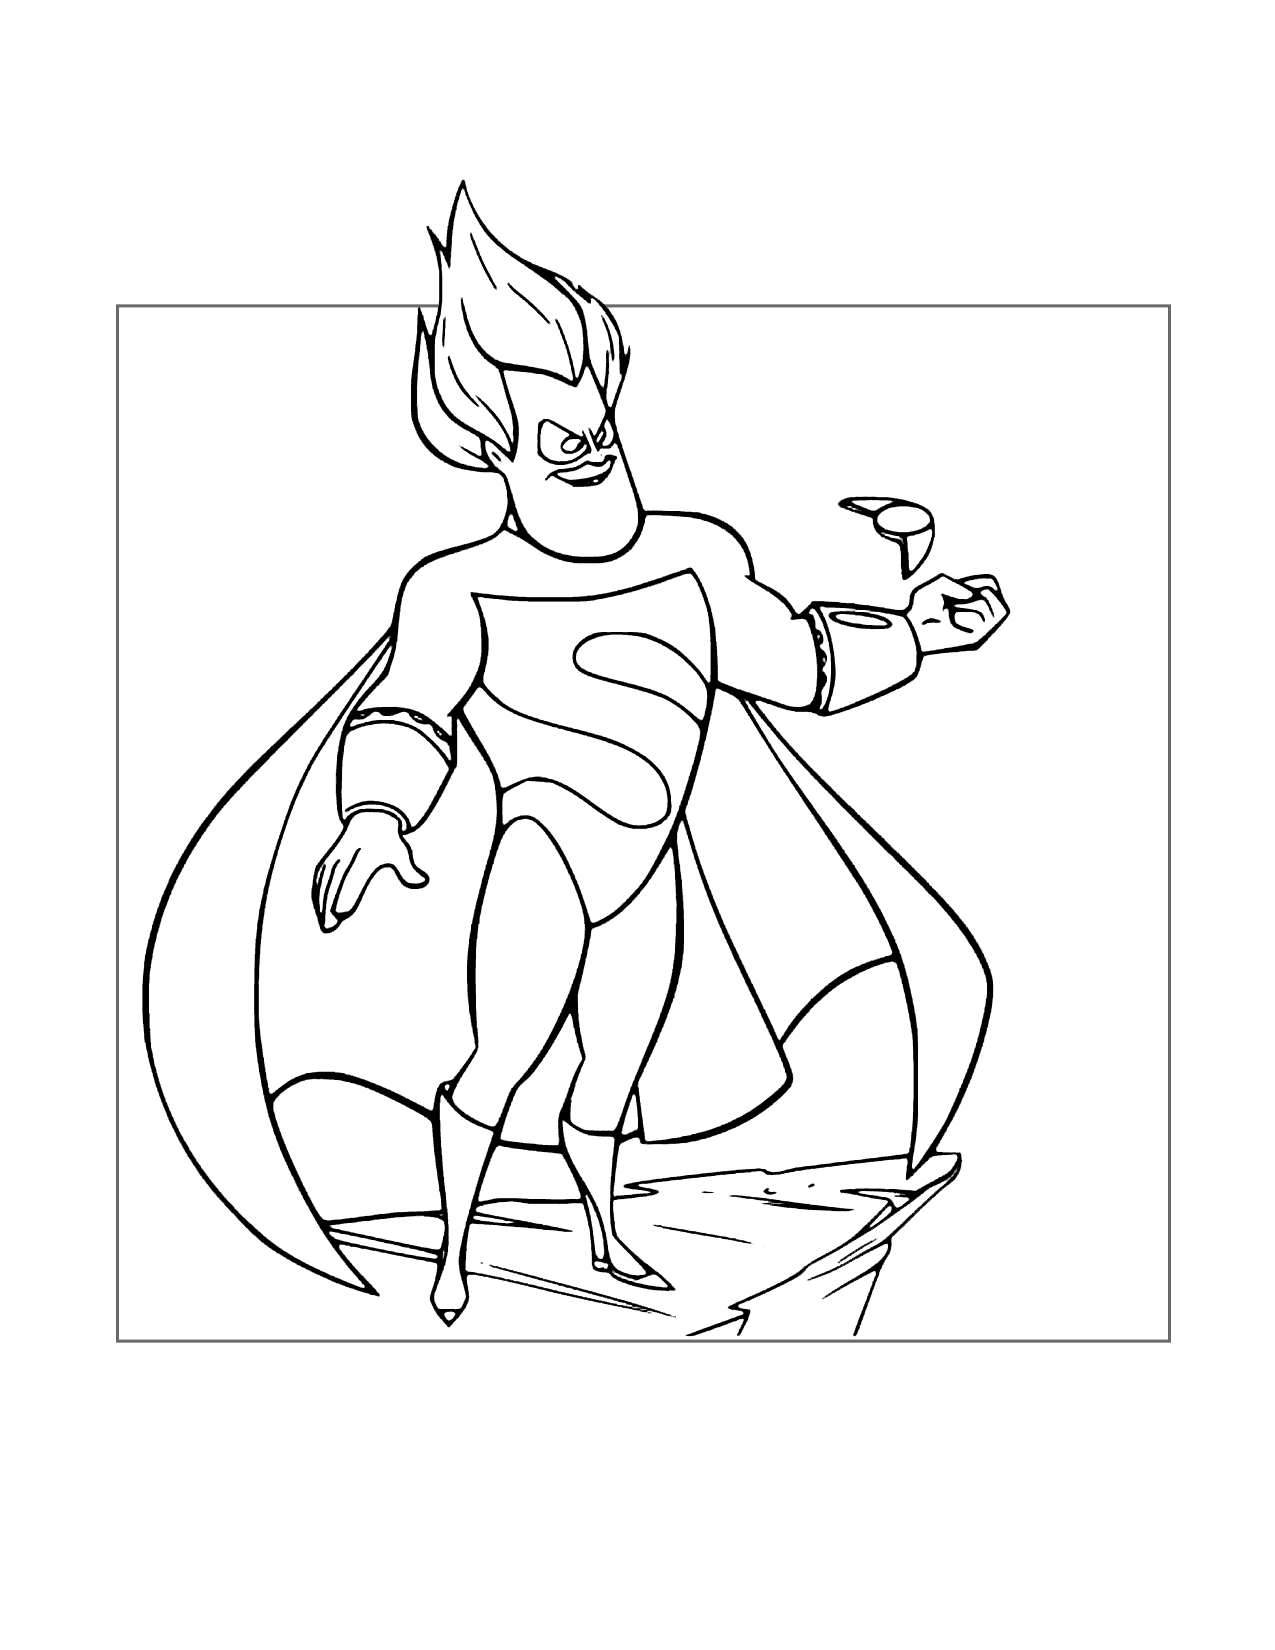 Buddy Pine, A.k.a. Syndrome Incredibles Coloring Page